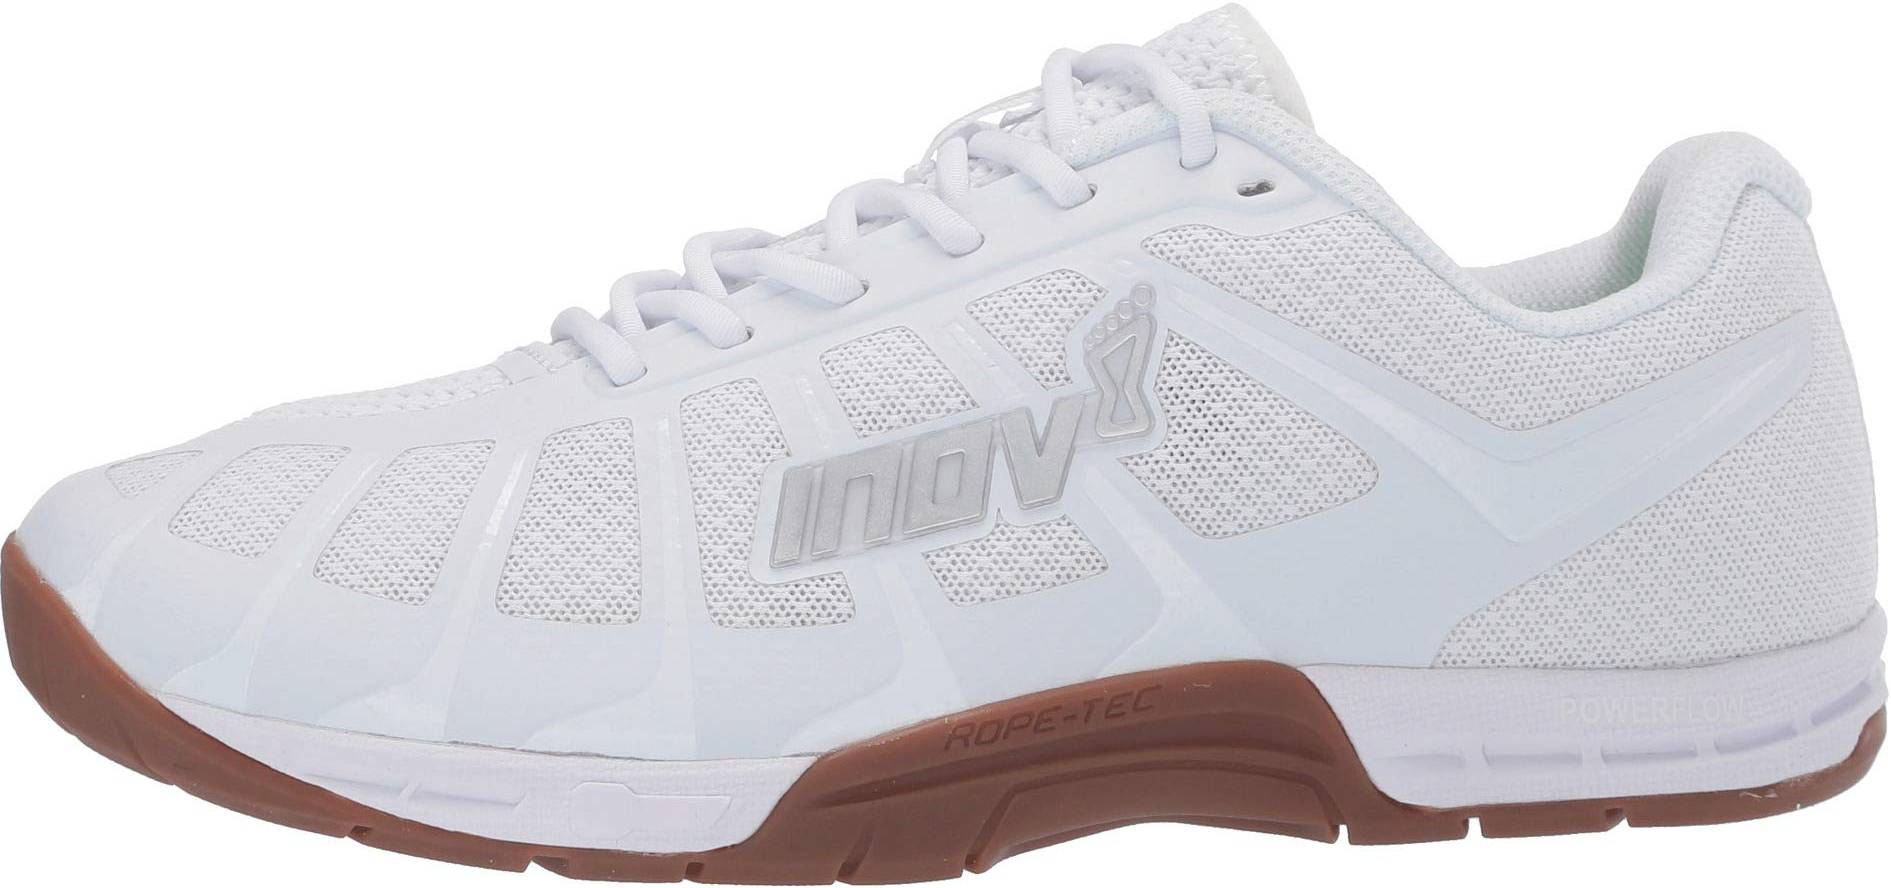 best inov 8 shoes for crossfit